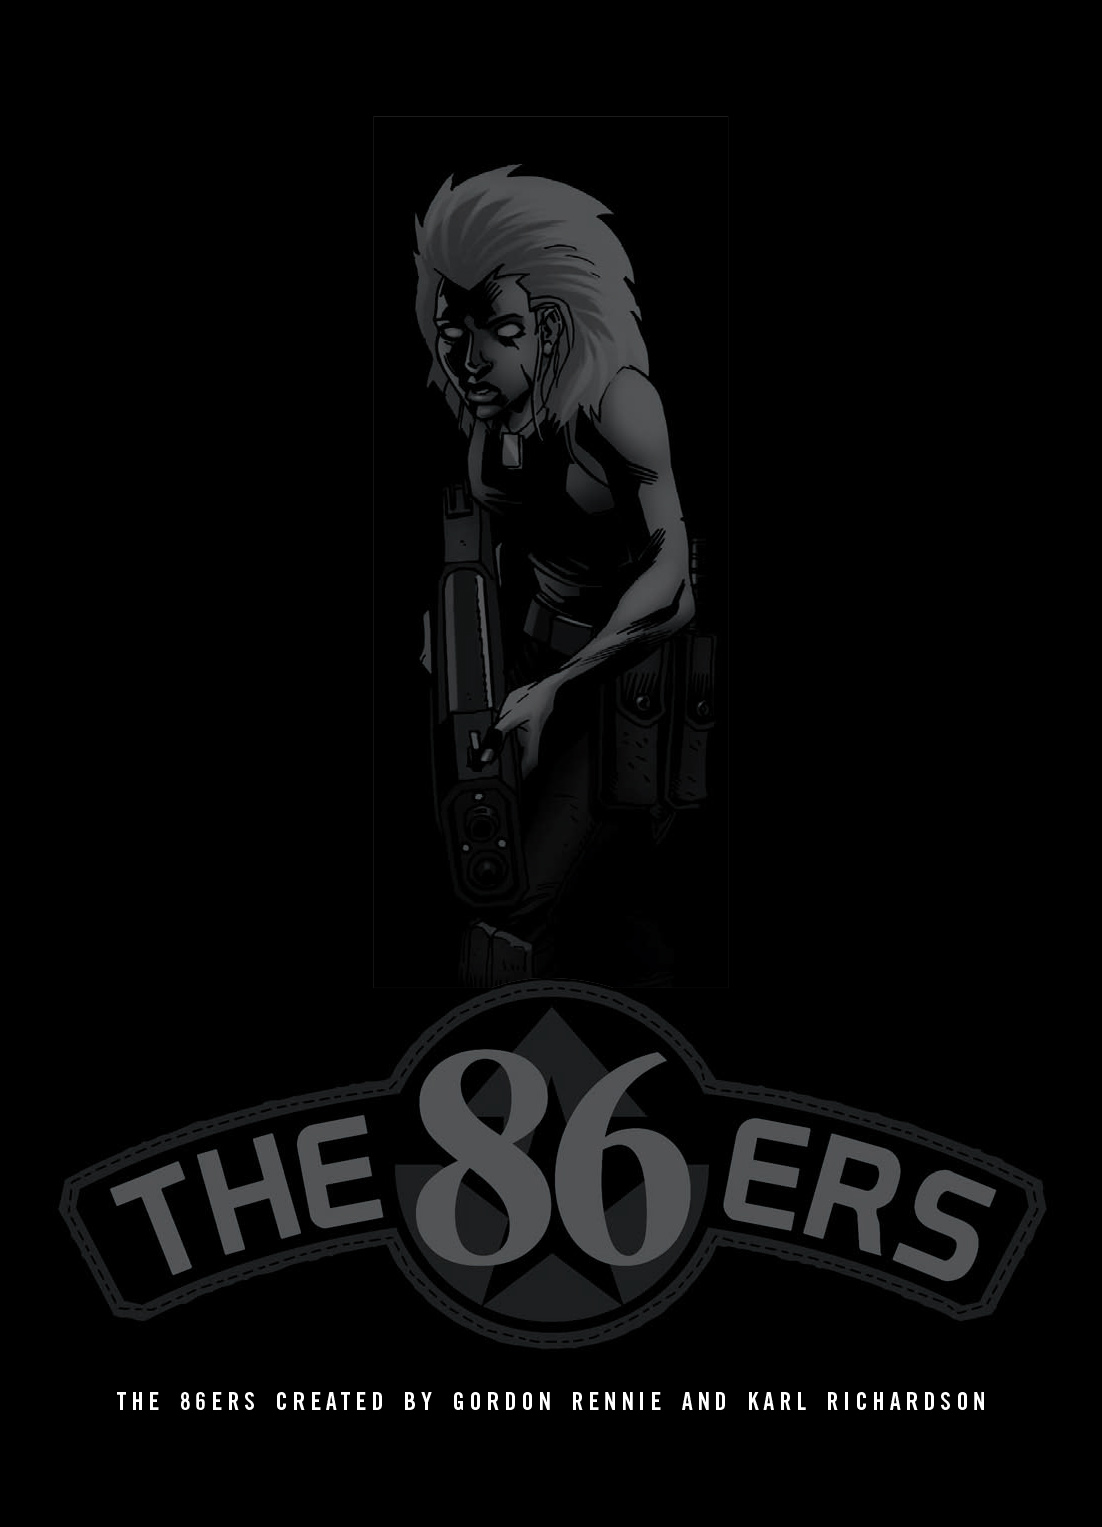 Read online The 86ers comic -  Issue # TPB - 3